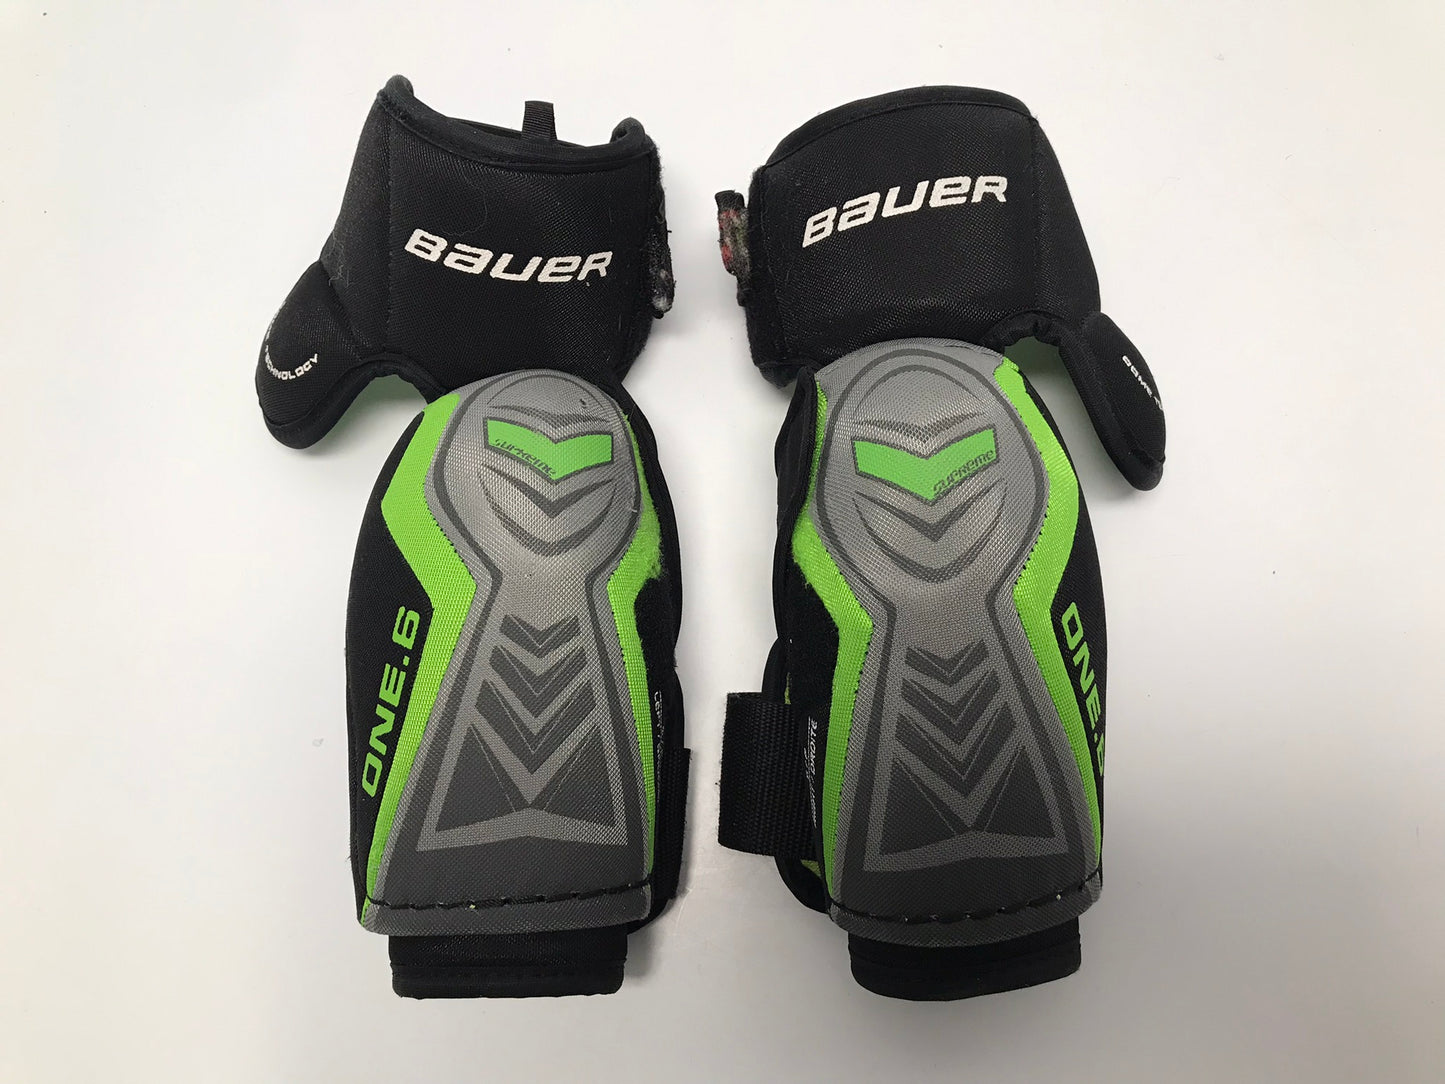 Hockey Elbow Pad Men's Size Small Bauer Supreme One.6 Black Lime Excellent